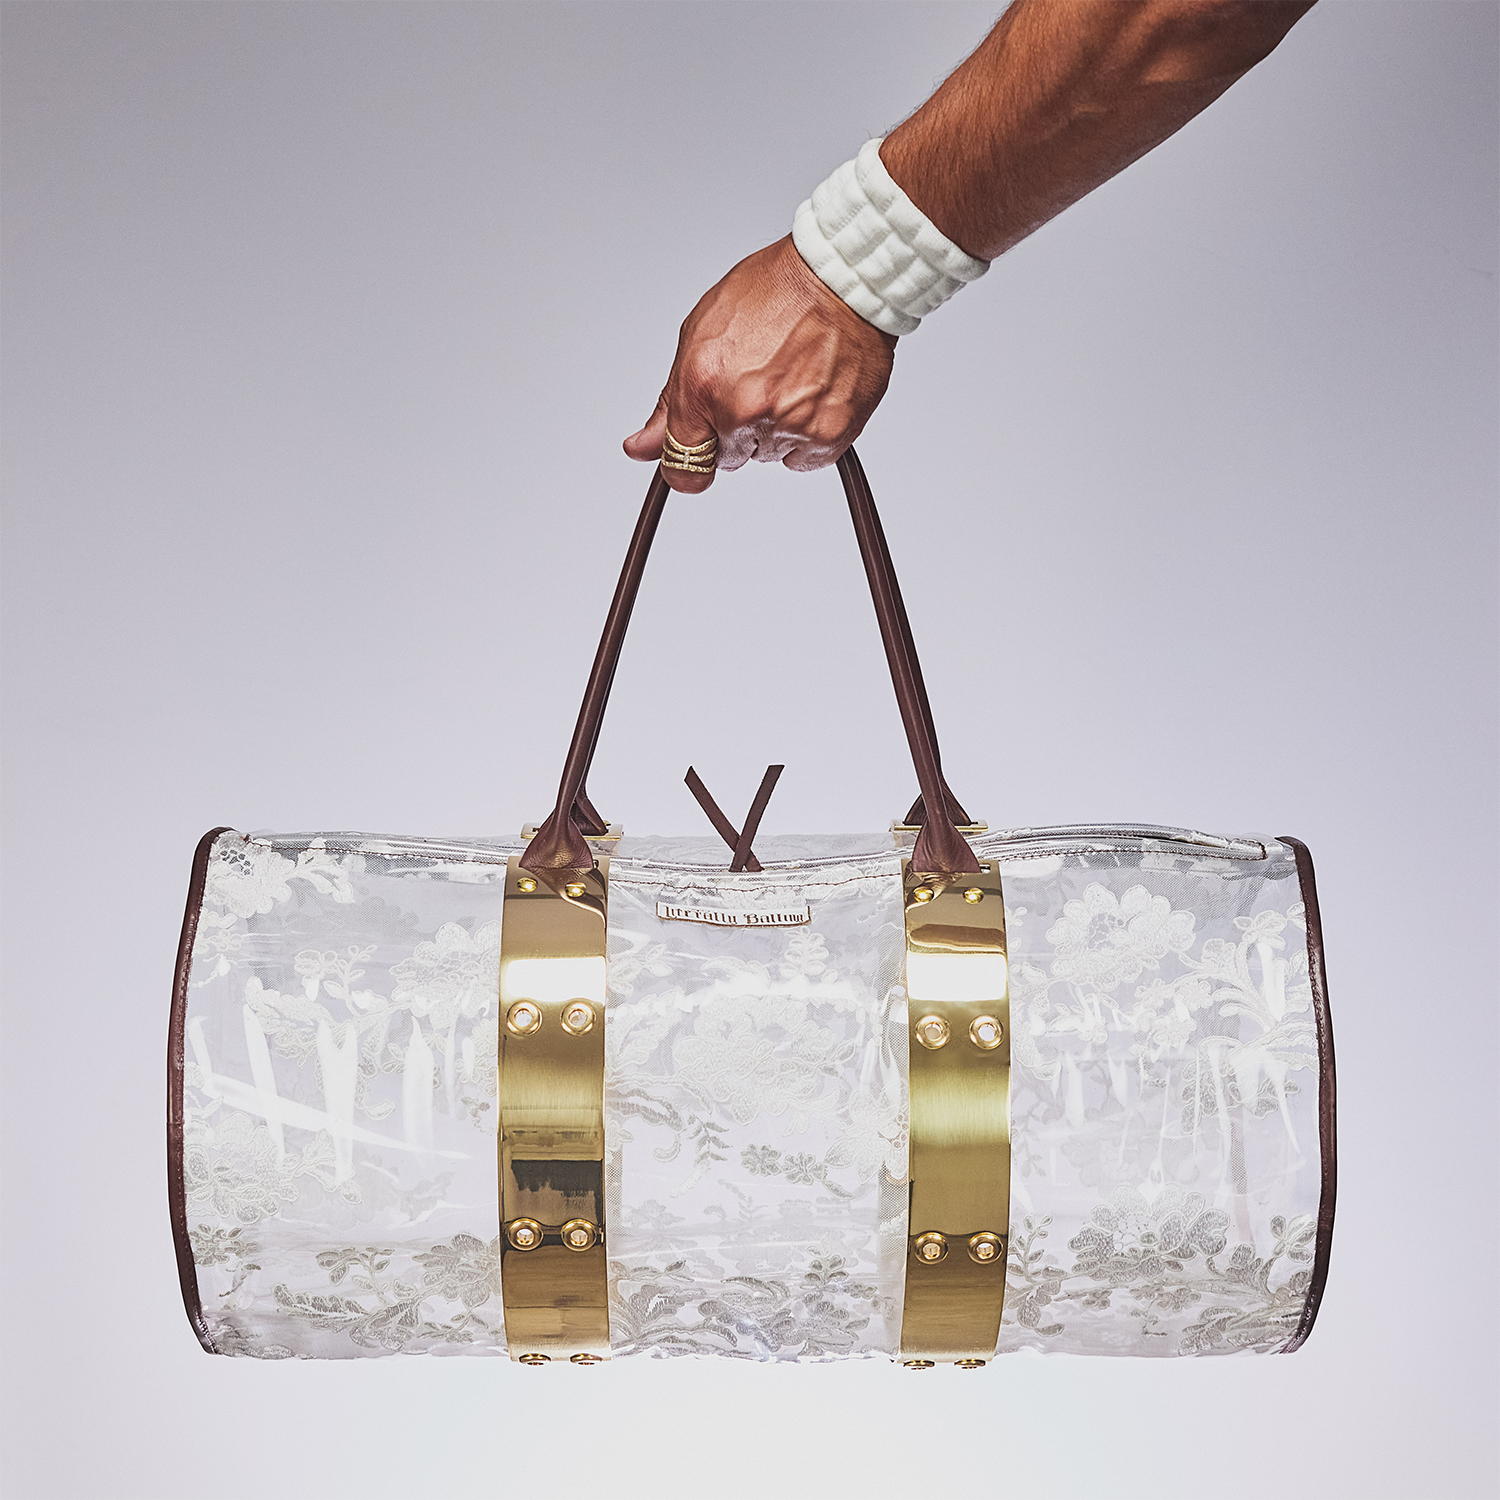 The Crystal Duffle – LiterallyBalling